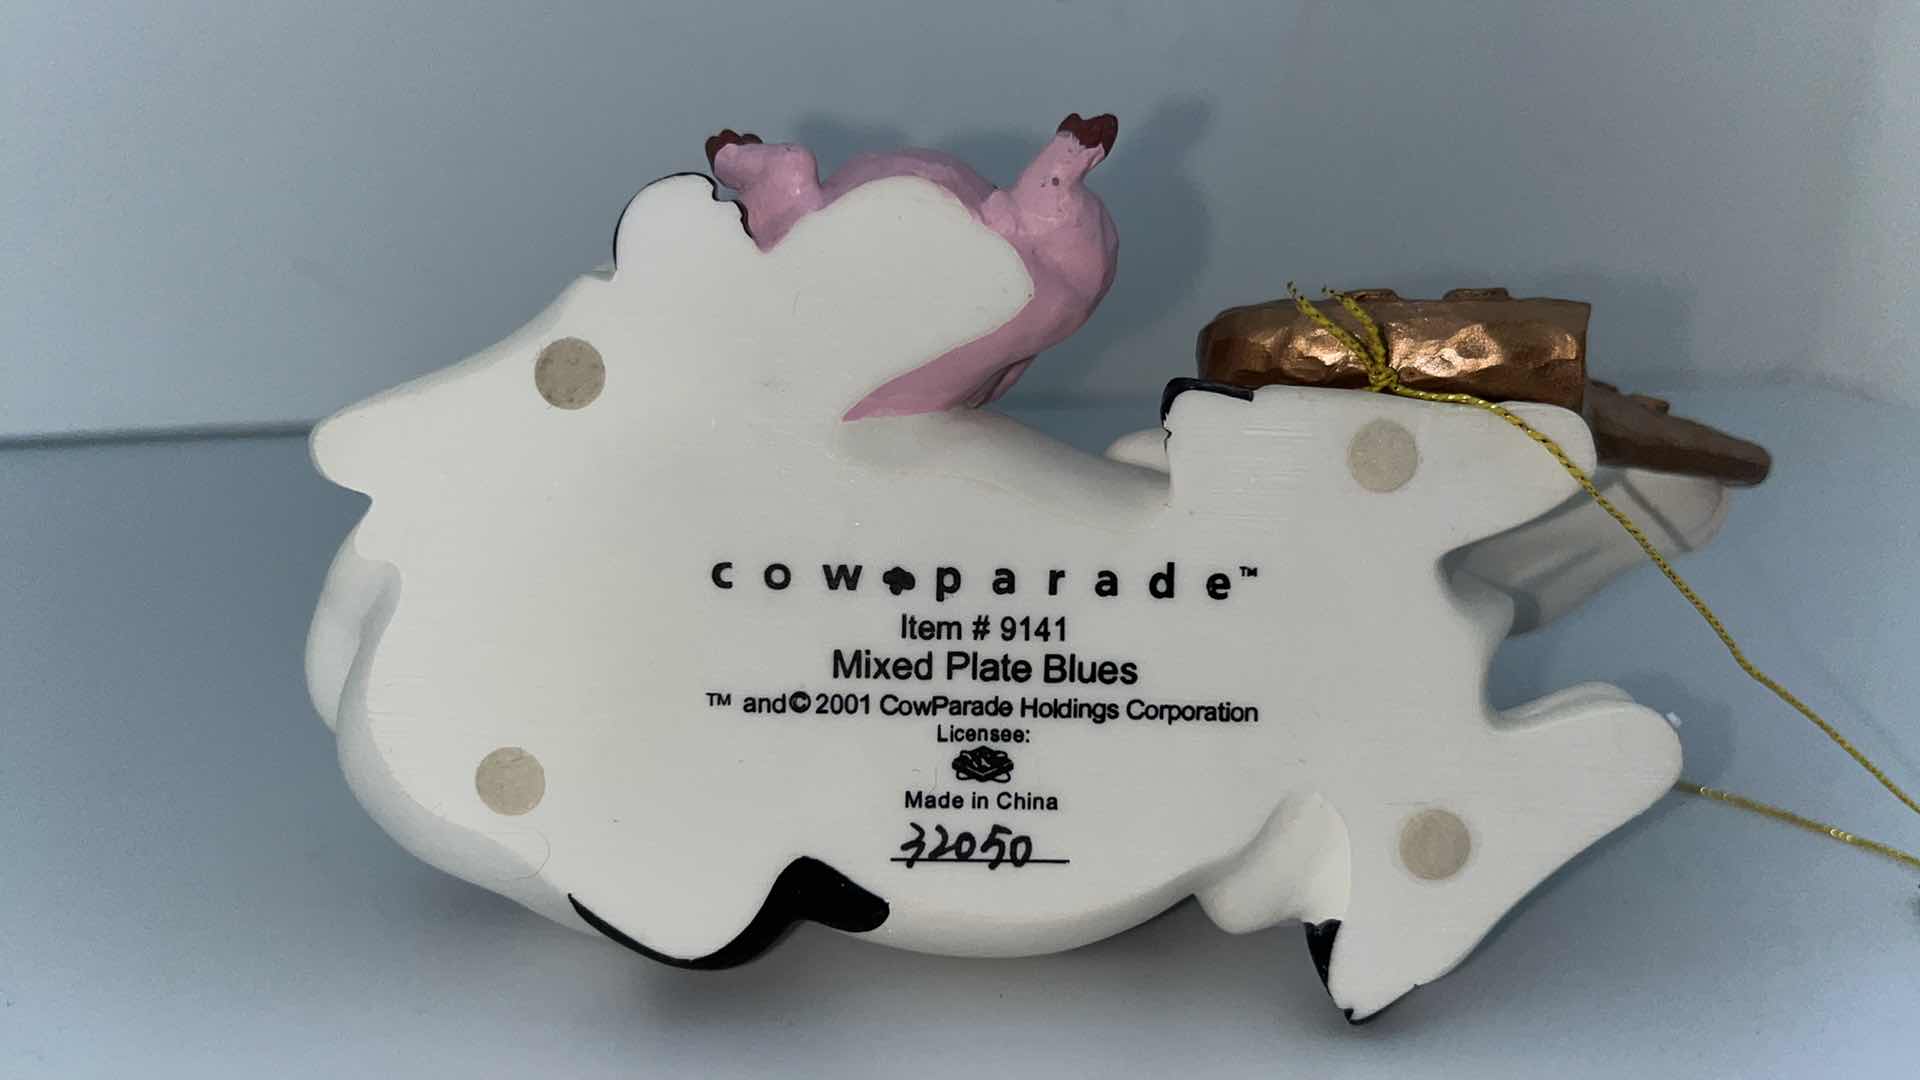 Photo 6 of WESTLAND GIFTWARE COW PARADE MIXED PLATE BLUES FIGURINE 2001 (9141)